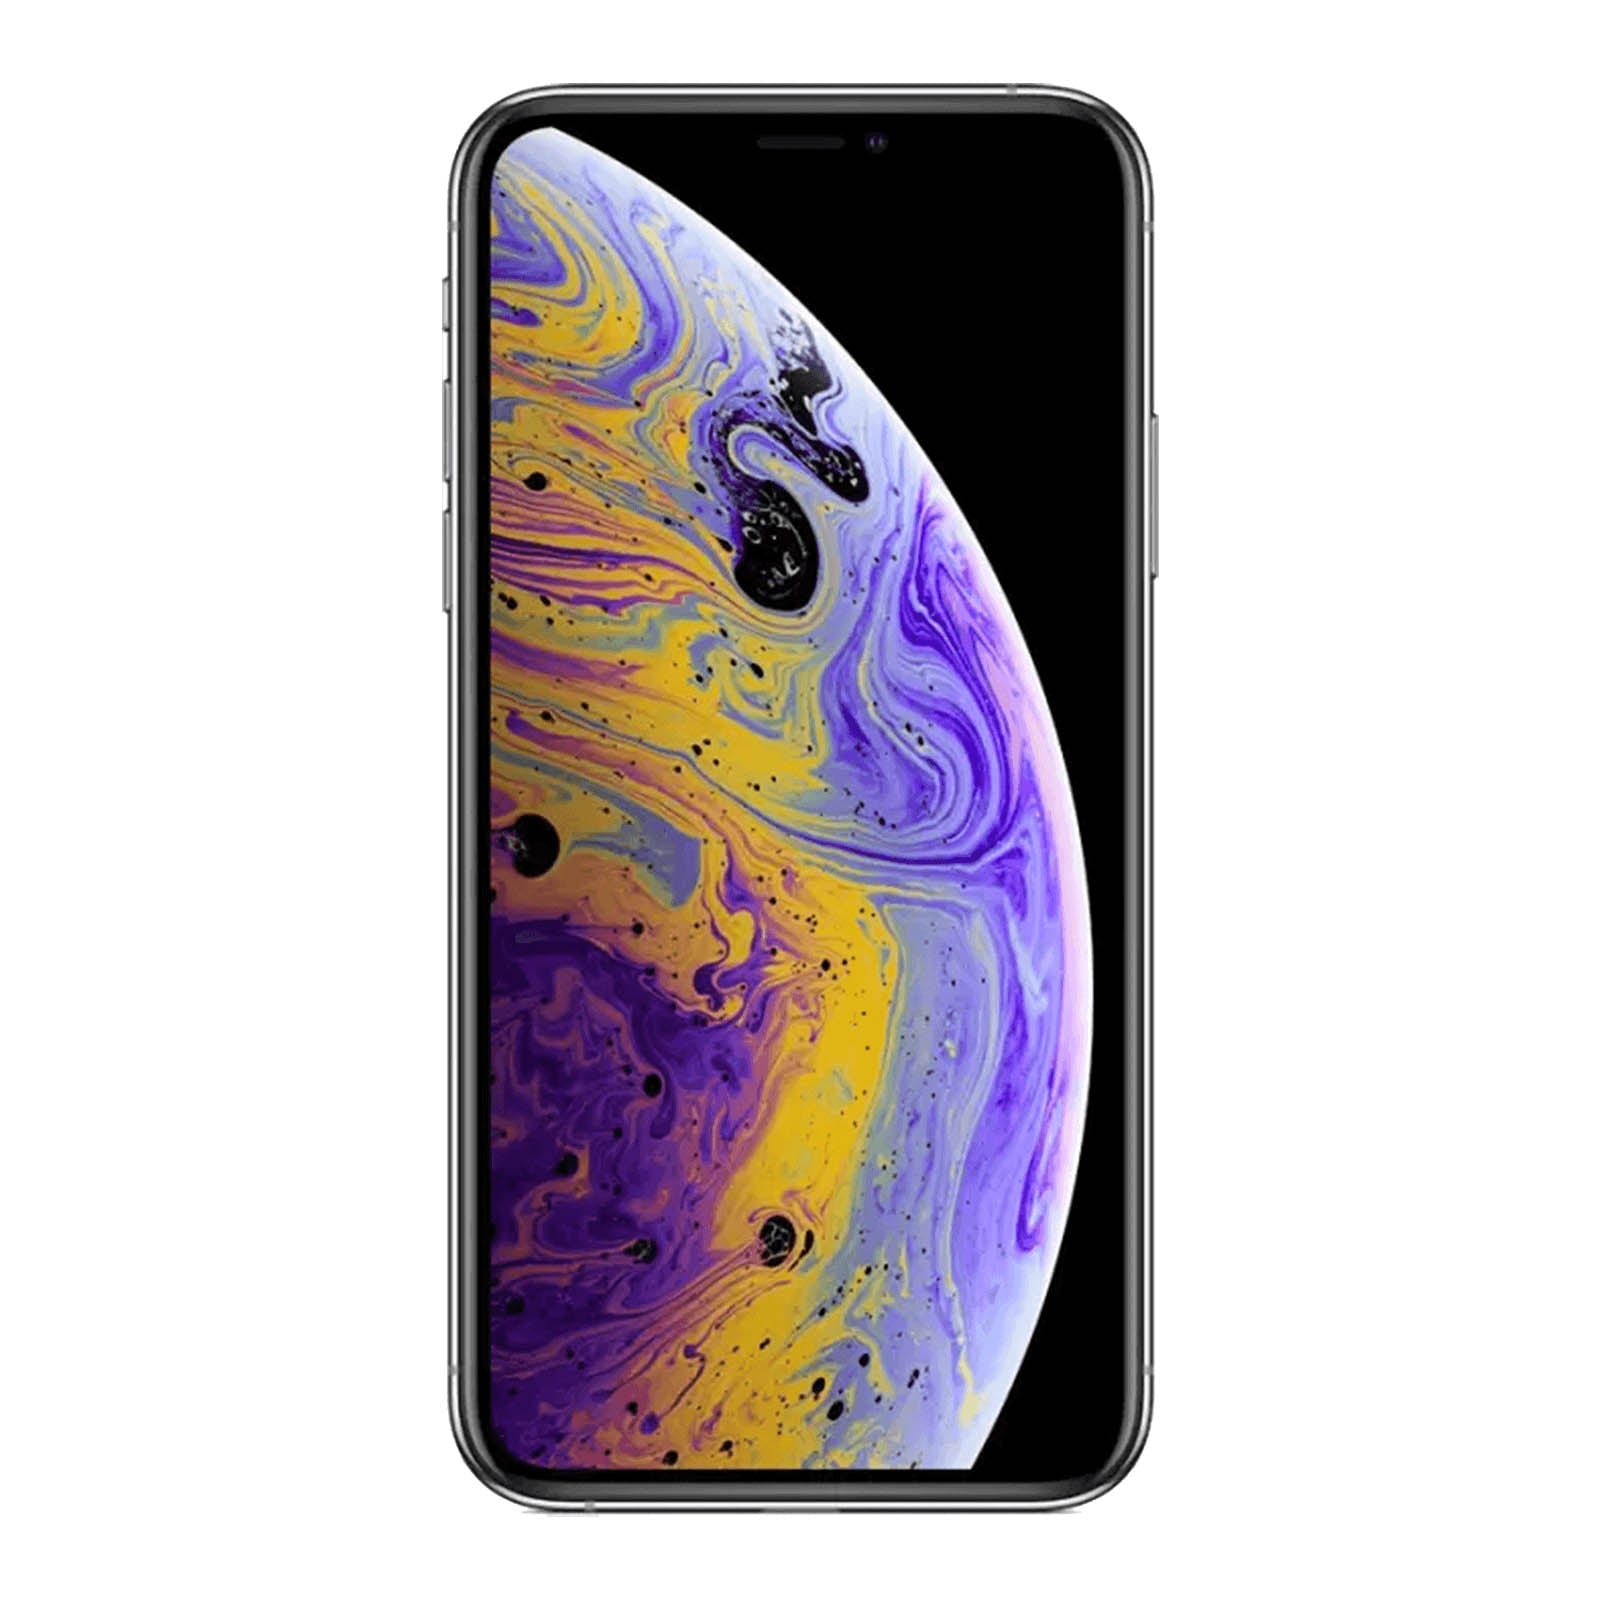 Apple iPhone XS 512GB Silver Good - T-Mobile